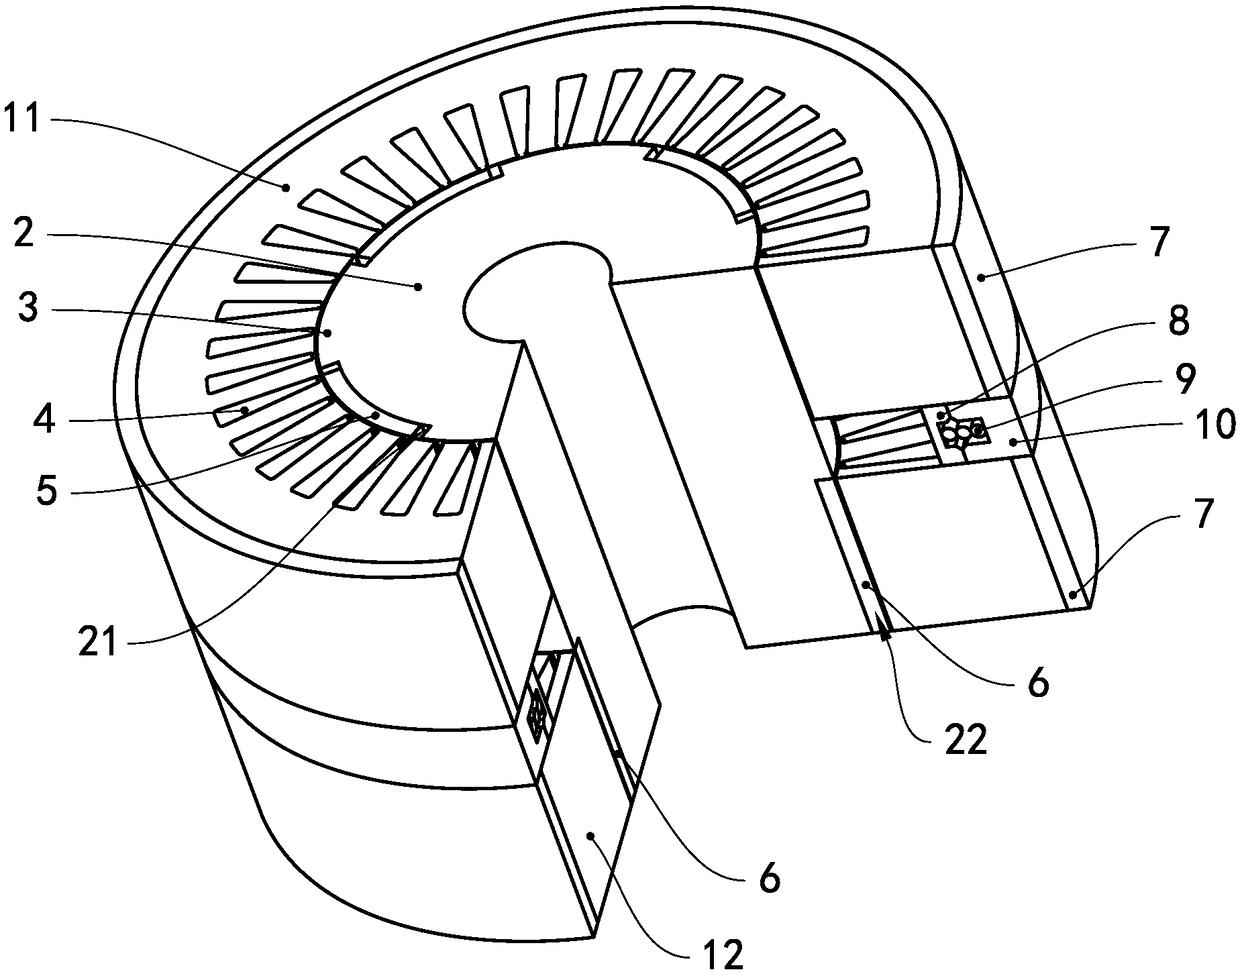 Stator assembly and hybrid excitation motor